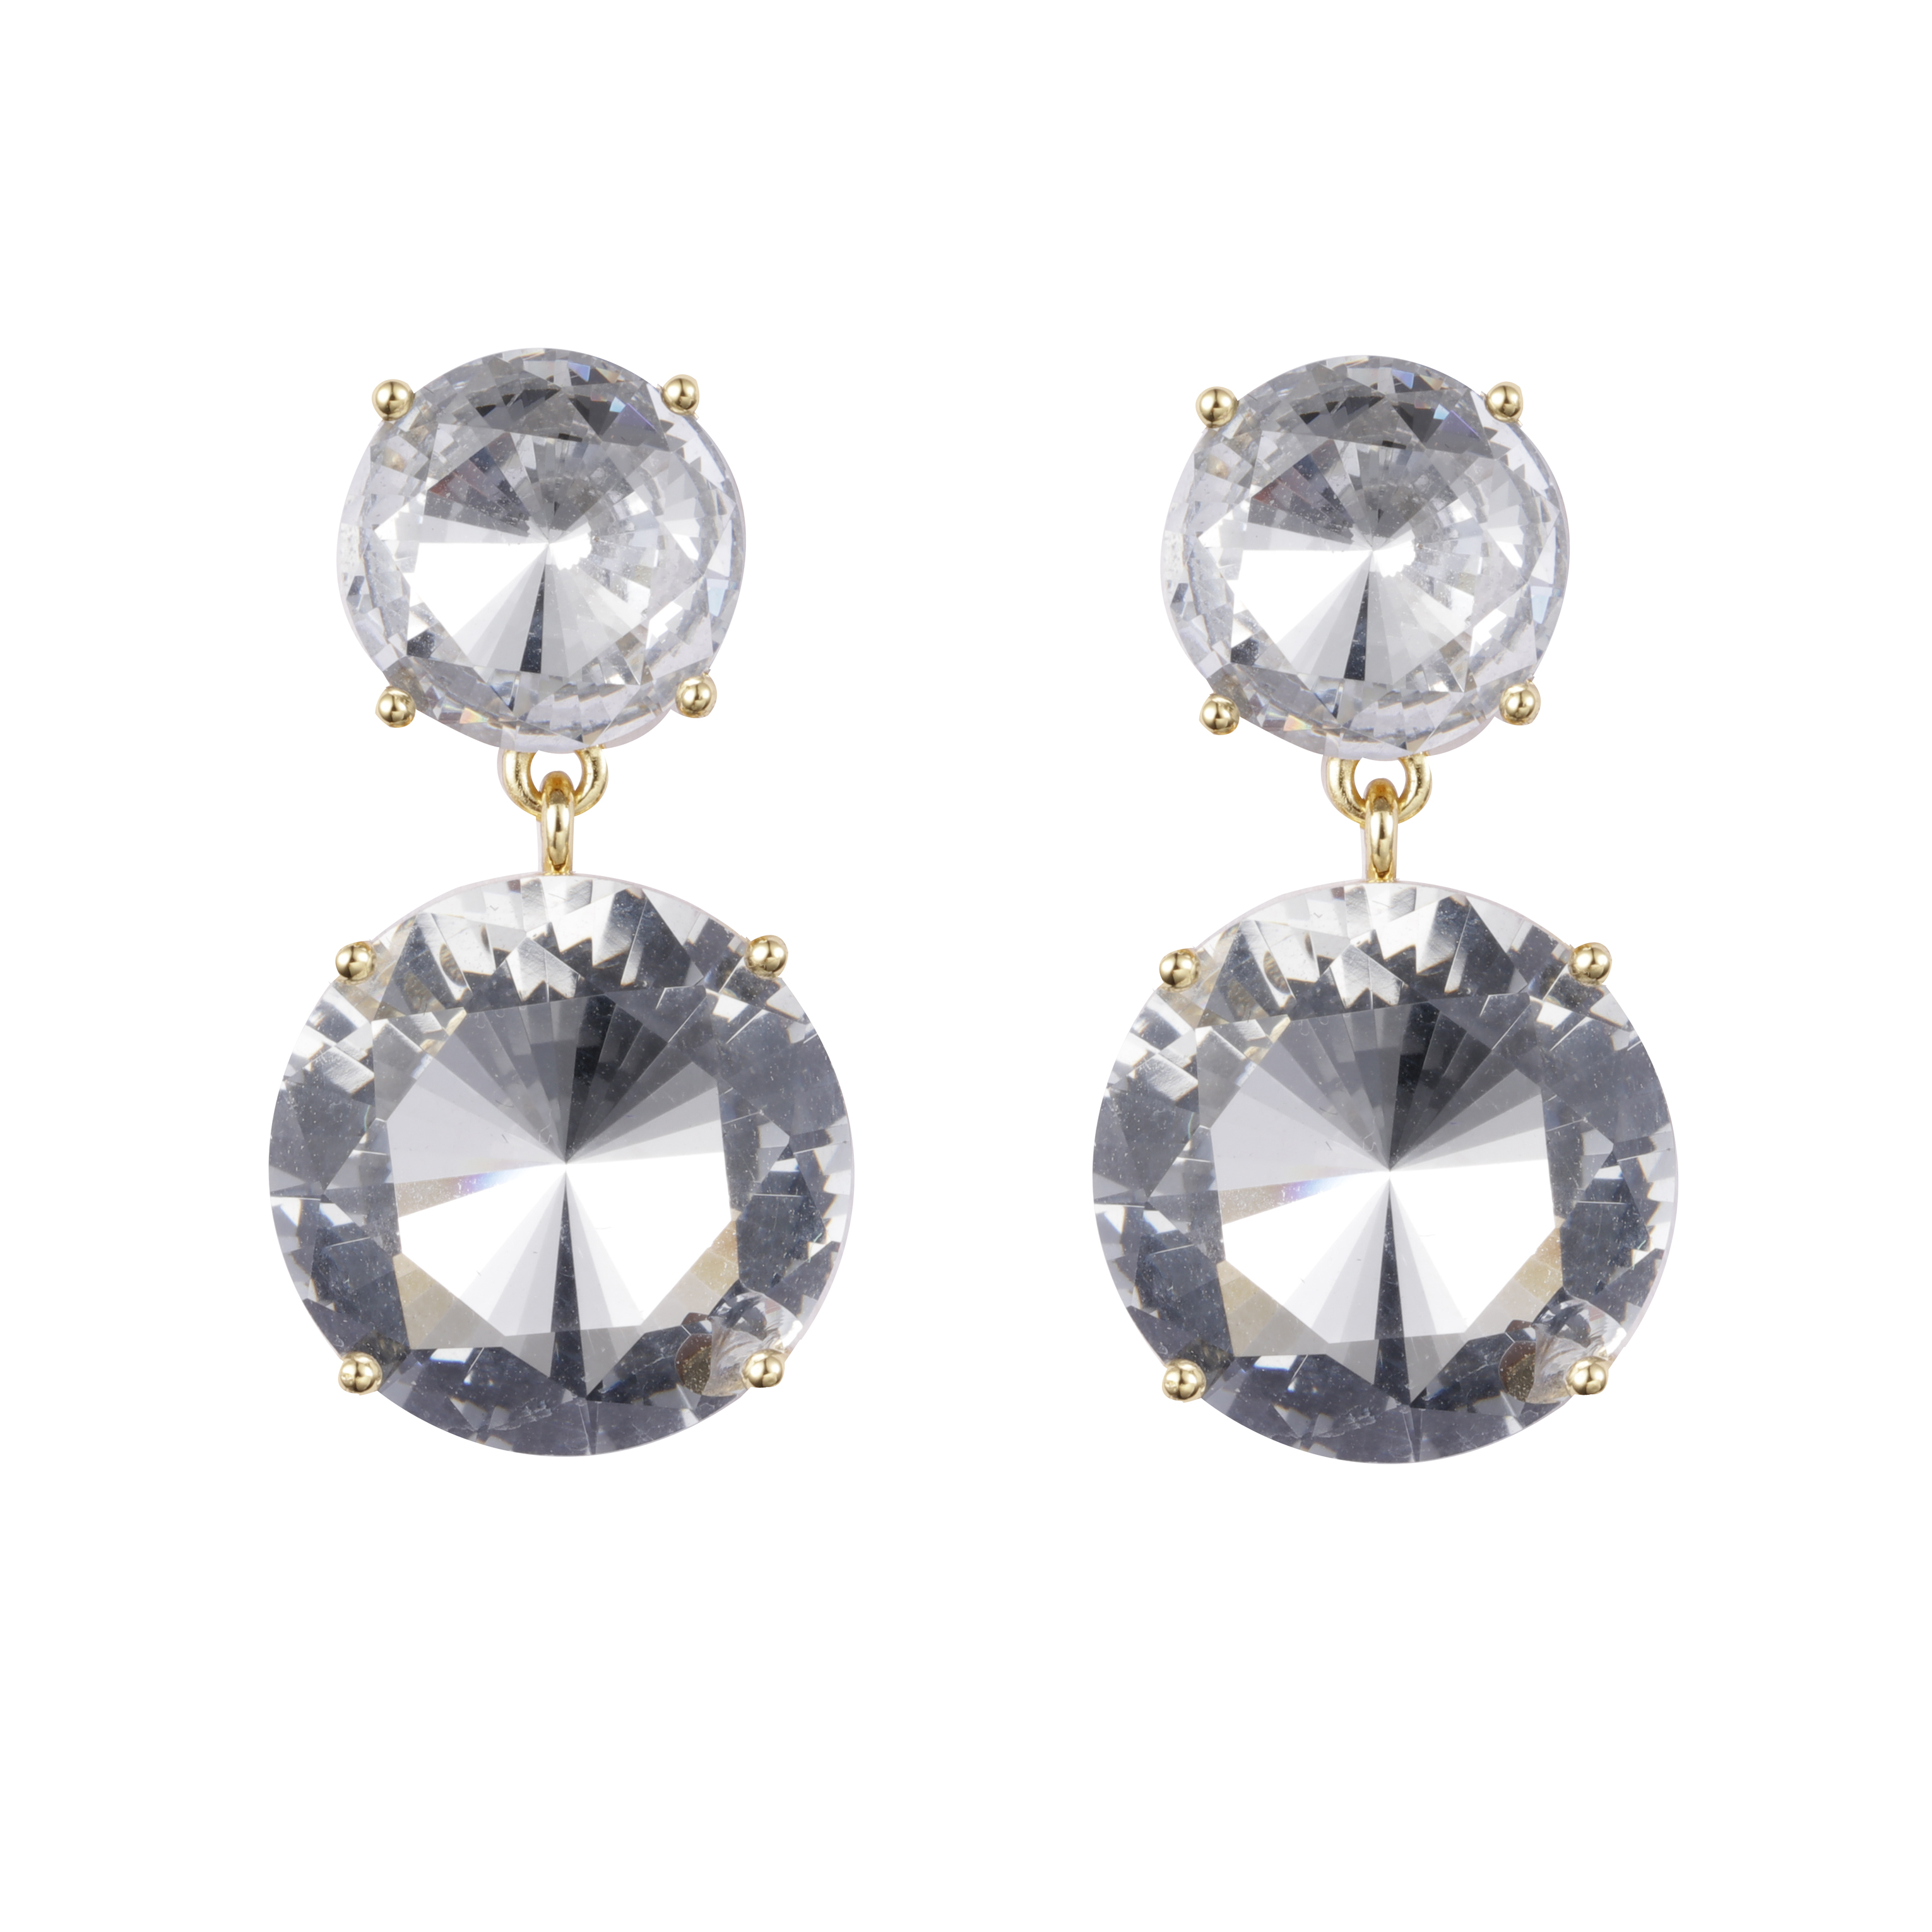 Whole Crystal Gold Plated Earrings